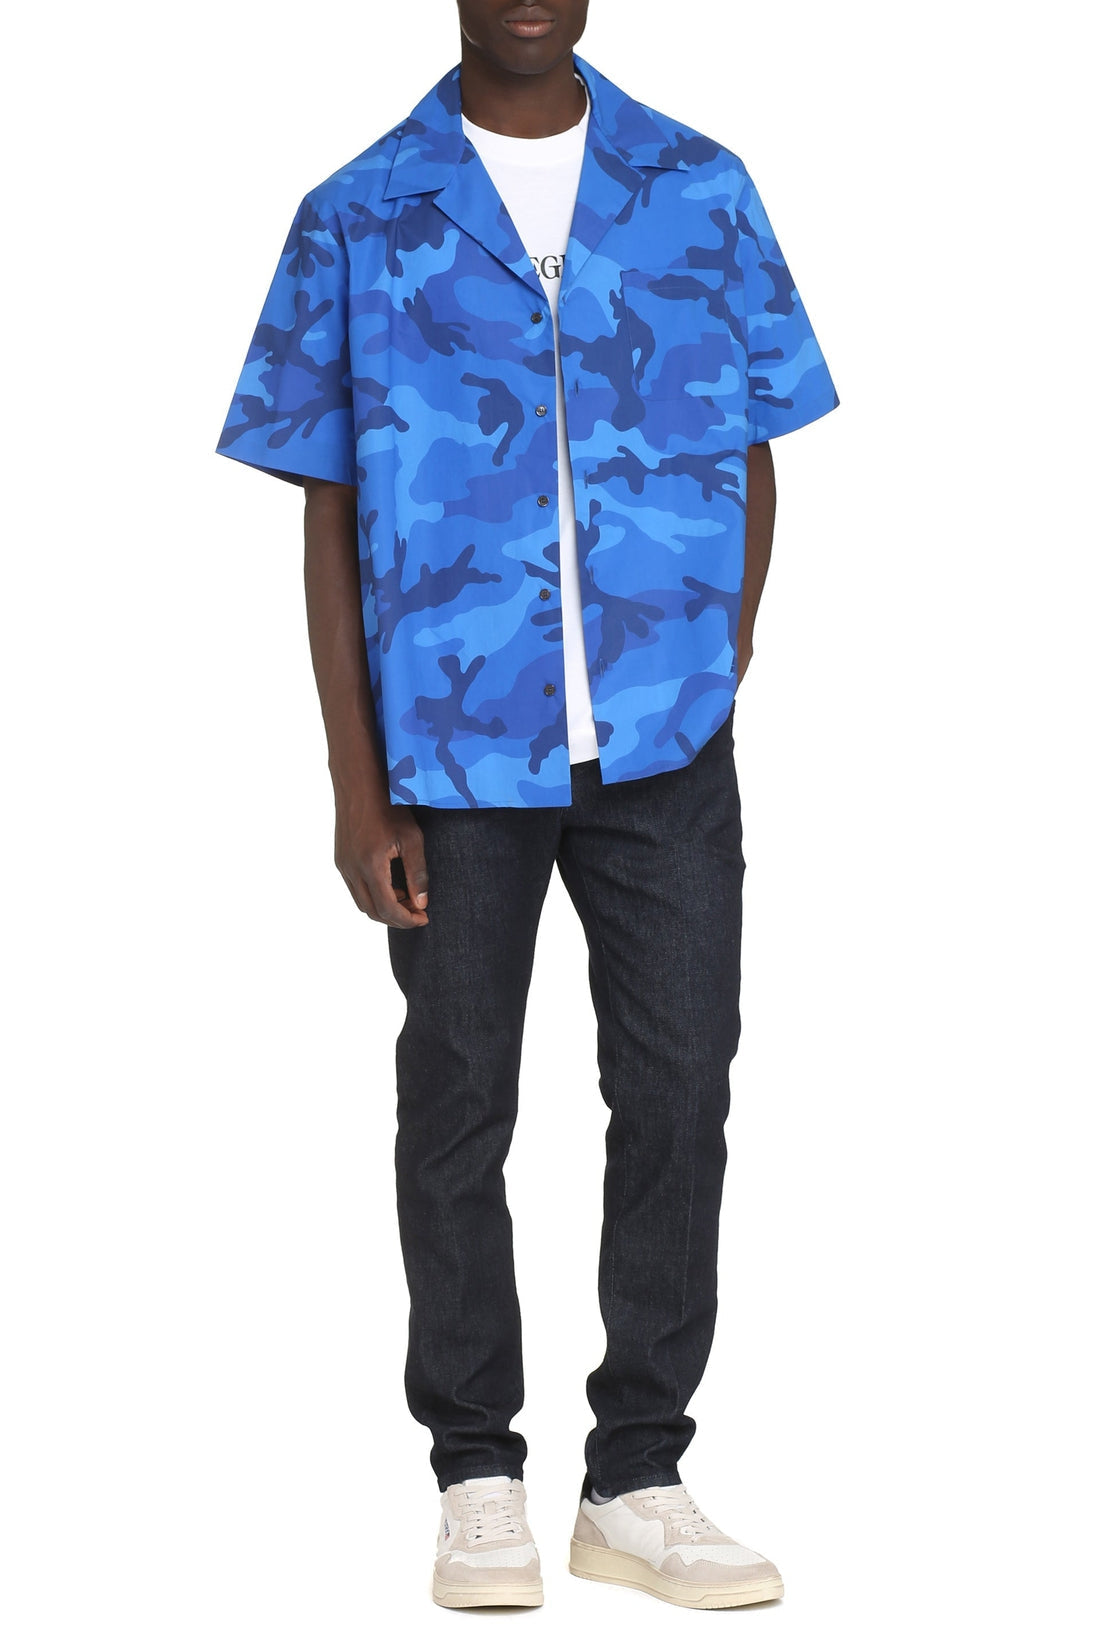 Valentino-OUTLET-SALE-Printed short sleeved shirt-ARCHIVIST